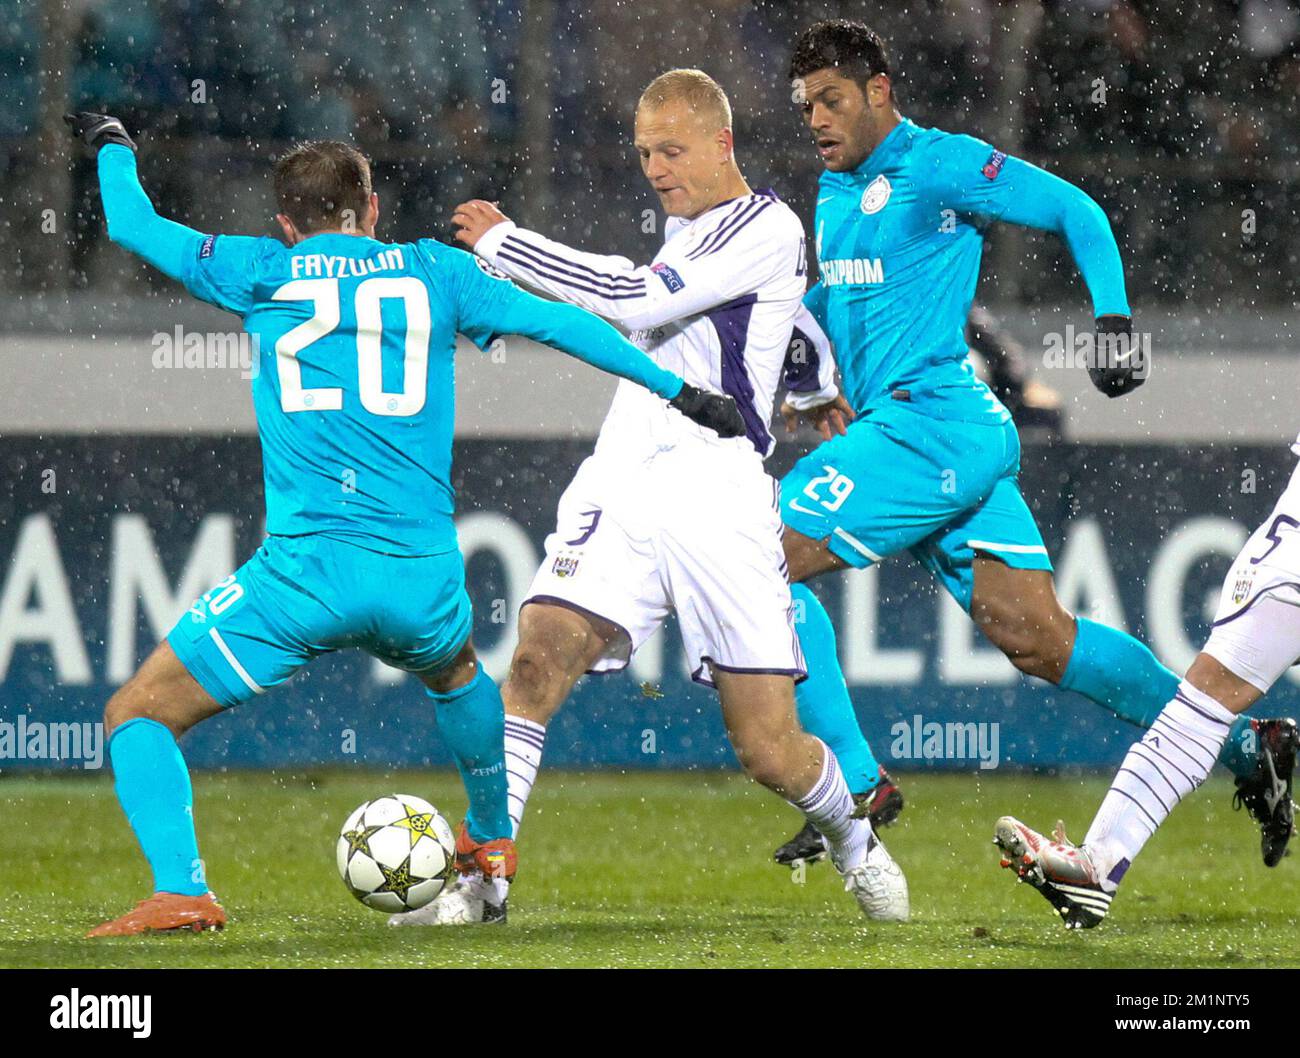 20121024 - SAINT PETERSBURG, RUSSIA: Zenit's Viktor Fayzulin and Anderlecht's Olivier Deschacht fight for the ball during the soccer match FC Zenit Saint Petersburg vs Belgian first division soccer team RSC Anderlecht, in group C of the UEFA Champions League tournament, Wednesday 24 October 2012 in Saint Petersburg, Russia. BELGA PHOTO VIRGINIE LEFOUR Stock Photo